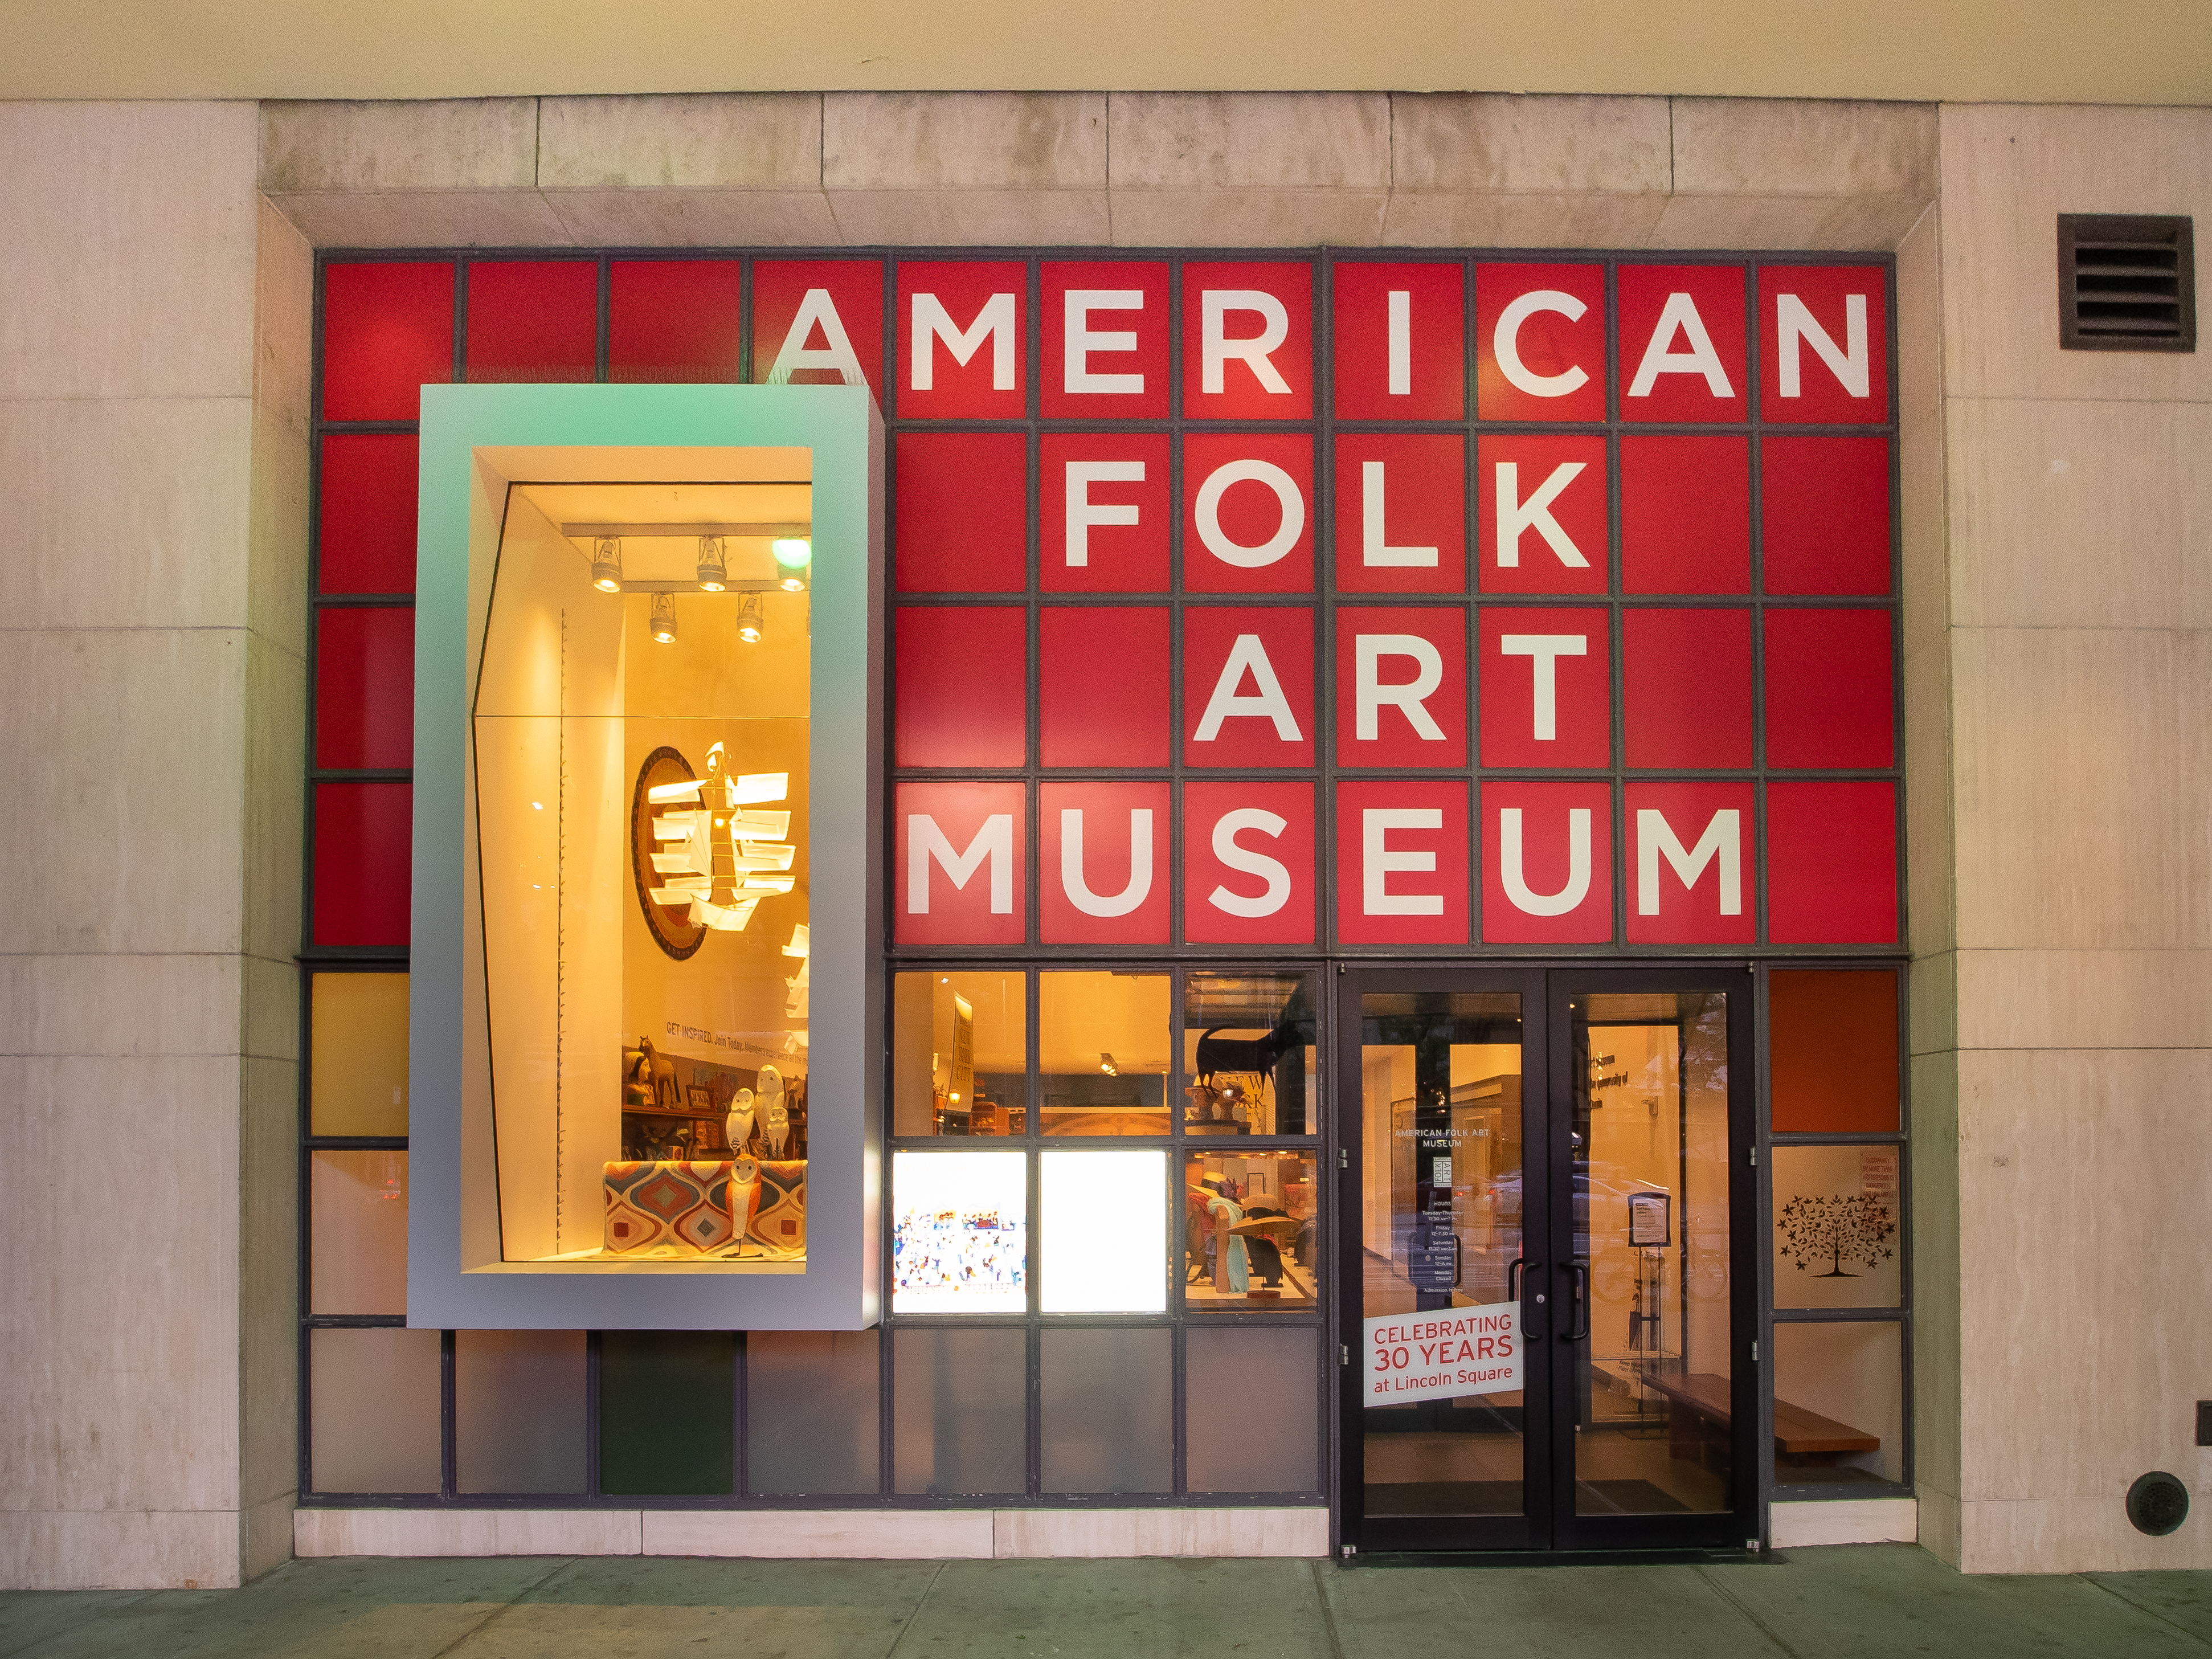 Entrance to the Americna Folk Art Museum in New York, photographed in June 2019. It recently announced it had accepted a $5 million donation from Becky and Bob Alexander, who will receive naming rights to the museum CEO’s job title in recognition of the gift. Image courtesy of Wikimedia Commons, photo credit Ajay Suresh. It was originally posted to Flickr and is shared under the Creative Commons Attribution 2.0 Generic license.